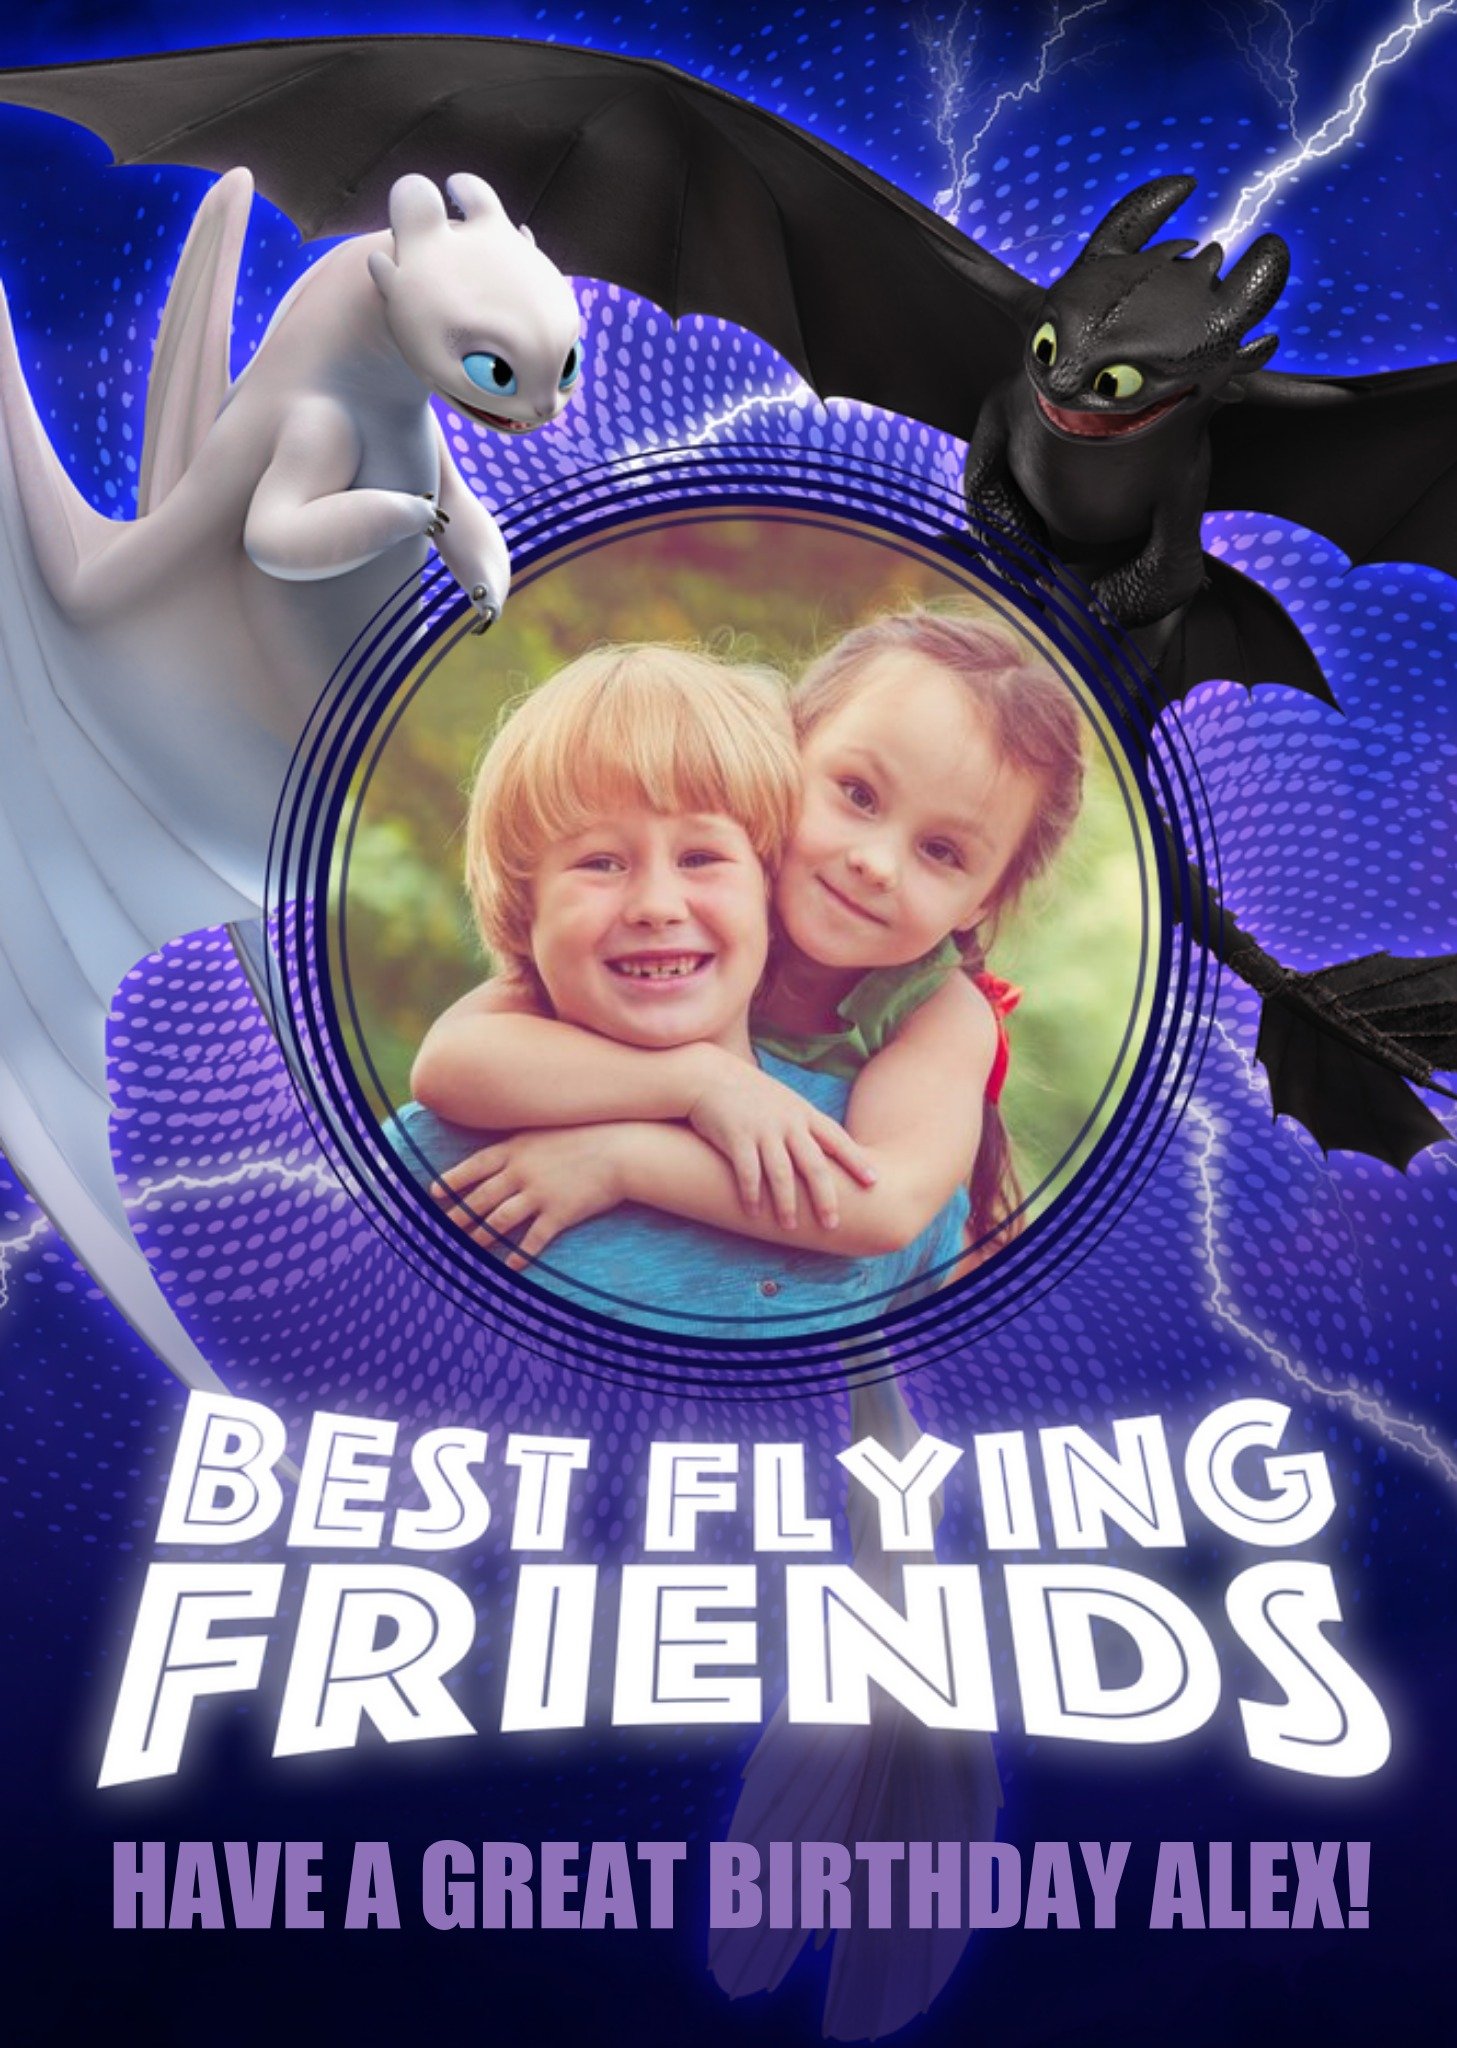 Other Best Flying Friends - How To Train Your Dragon Birthday Card, Large